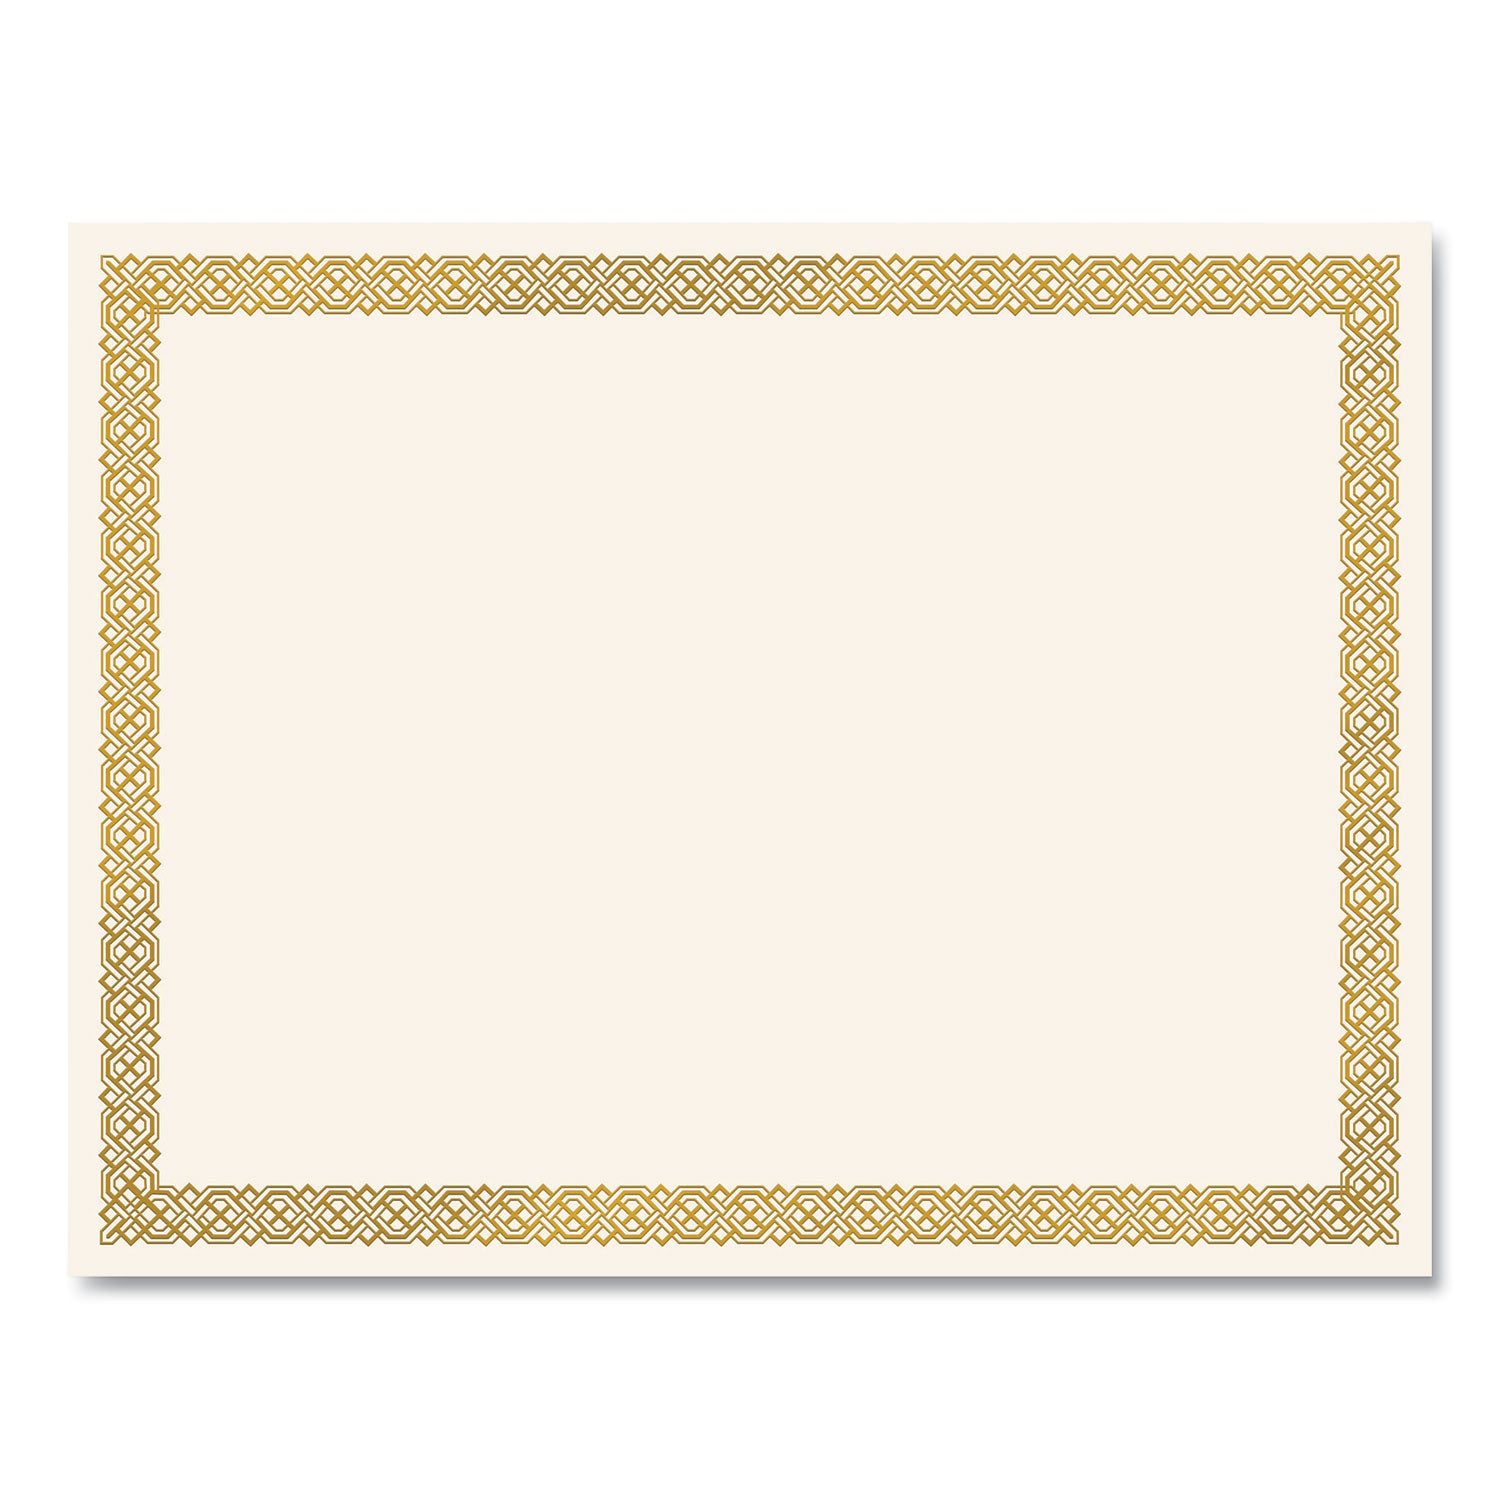 foil-border-certificates-85-x-11-ivory-gold-with-gold-braided-border-15-pack_grp963006 - 2